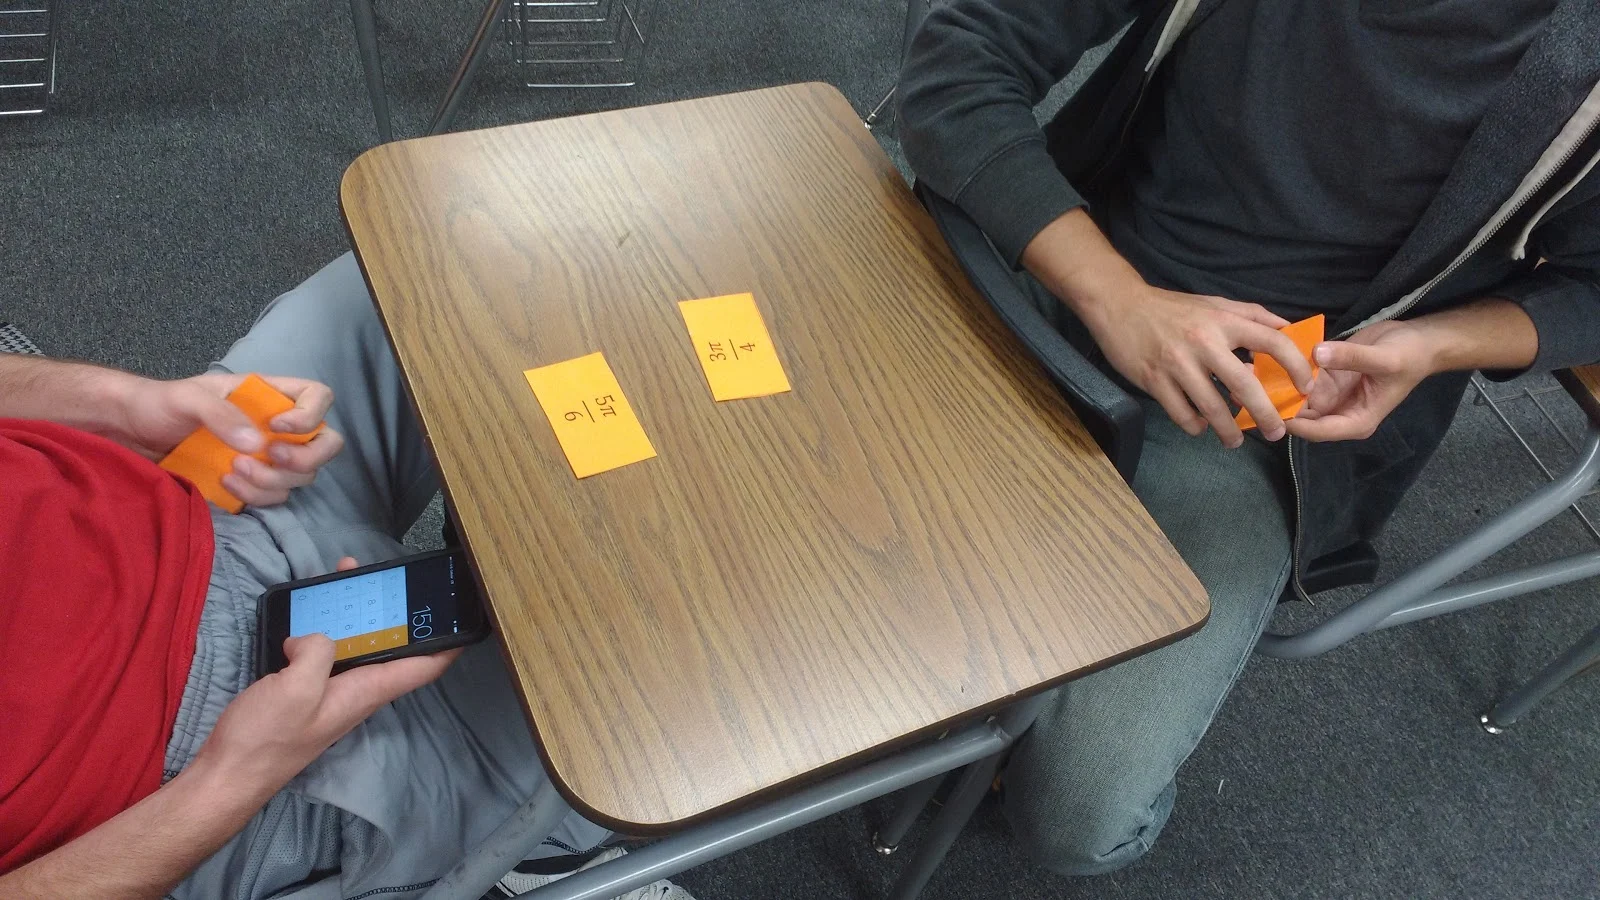 students playing radians degrees war card game. 